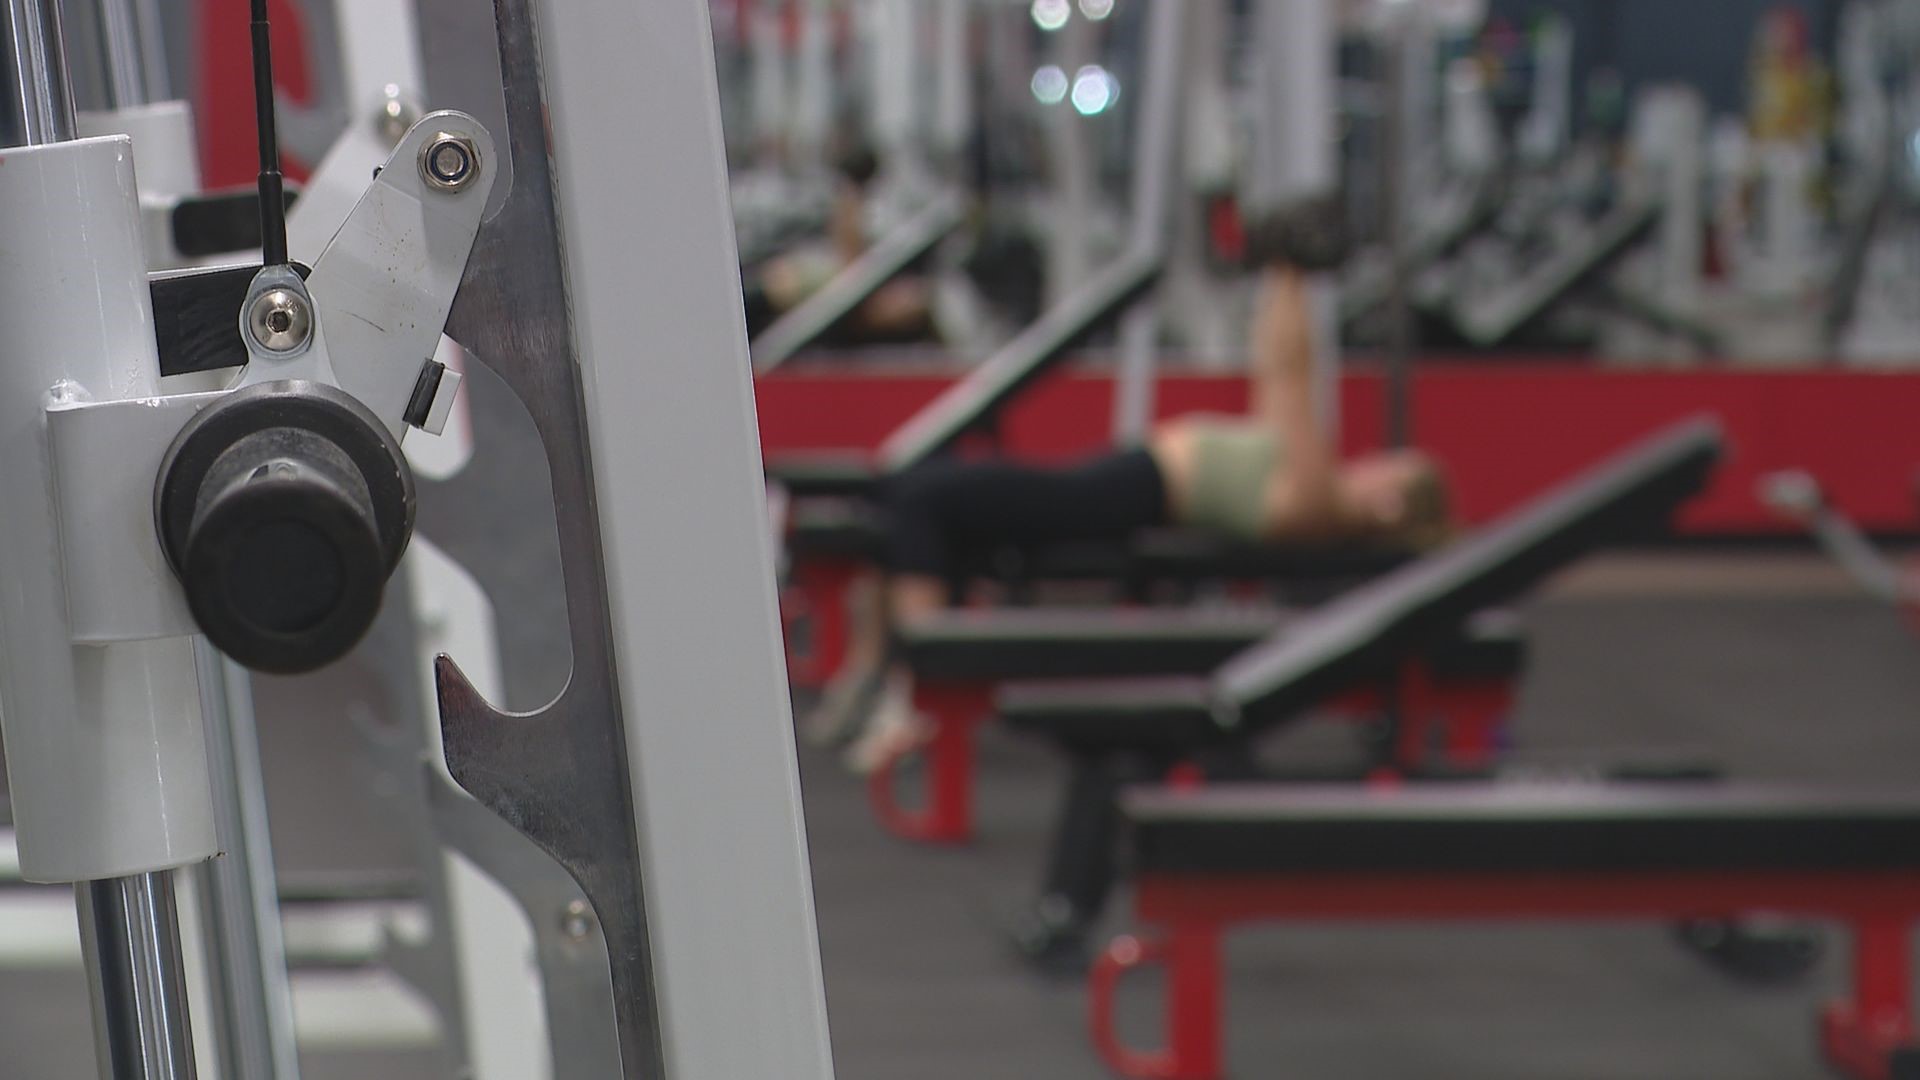 A professional bodybuilder opened a 24-hour gym that houses weights and other equipment you can't find in other fitness centers.